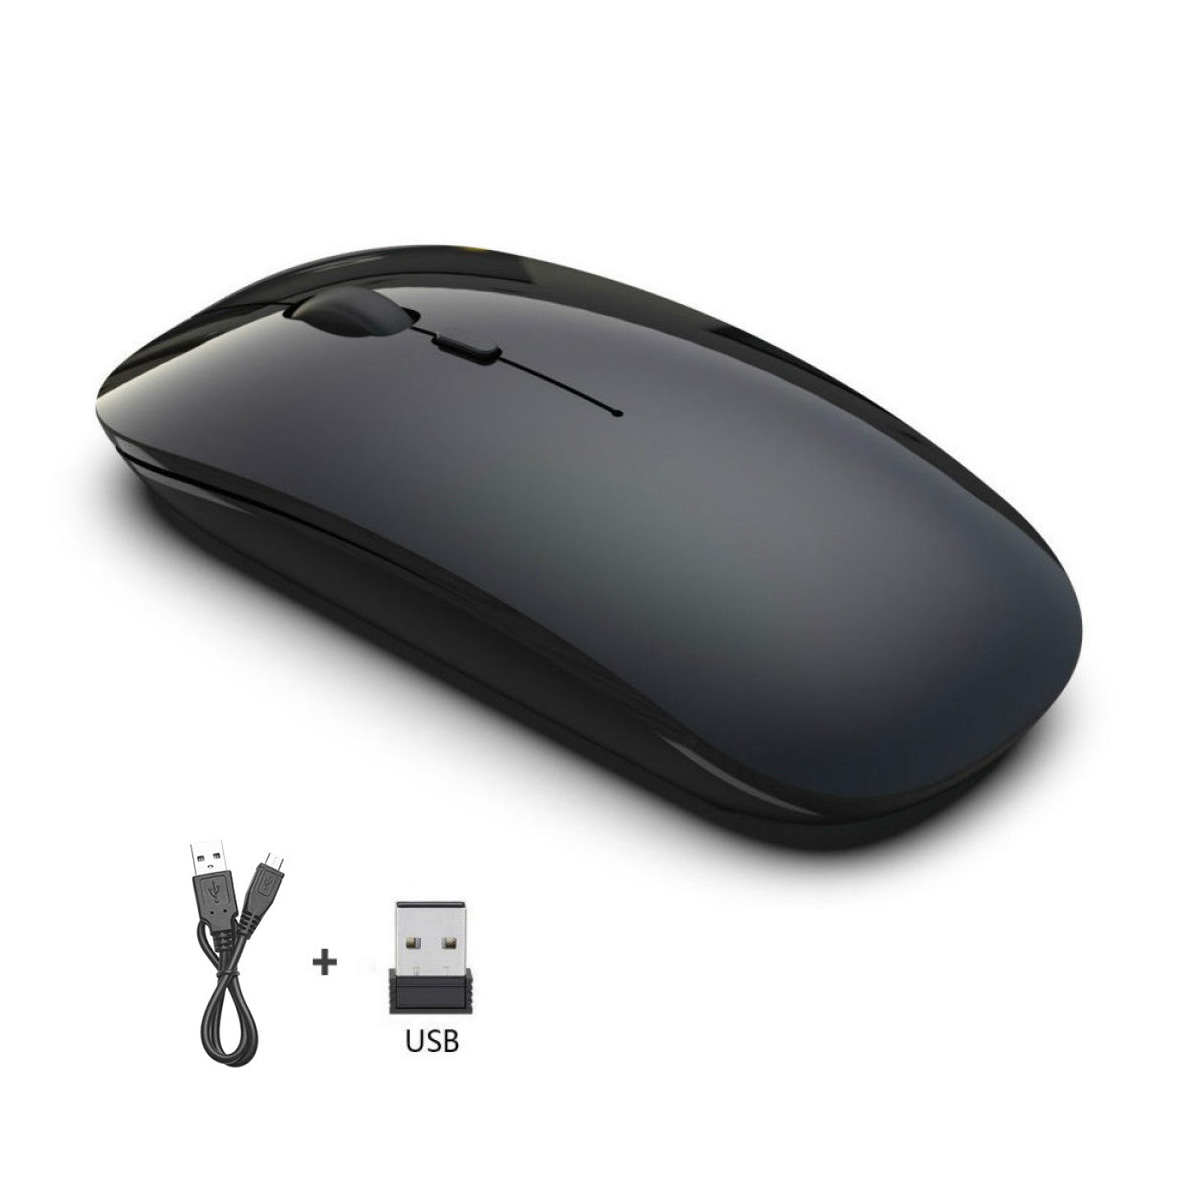 price of mouse for pc